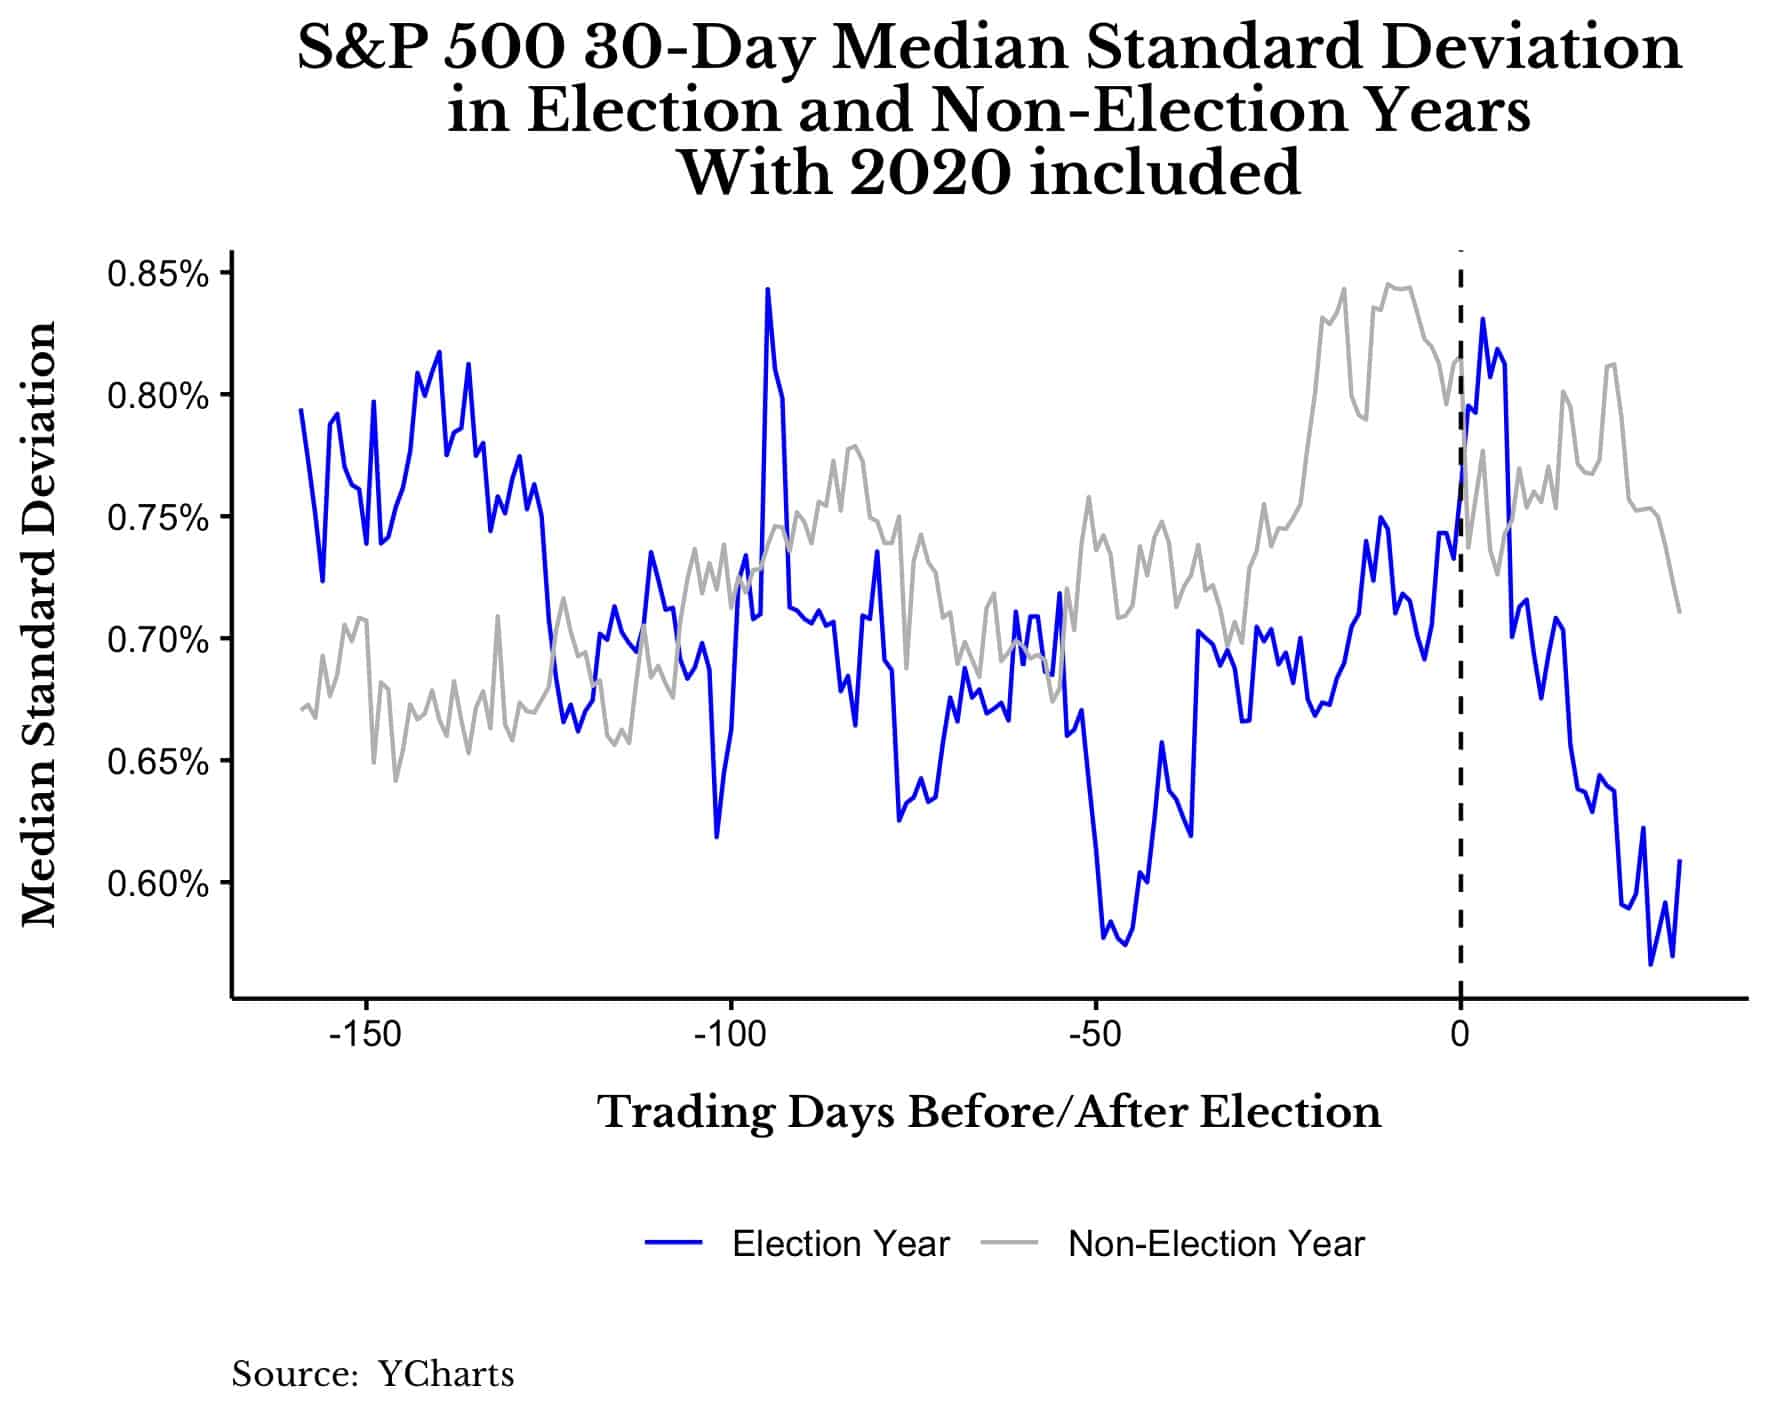 S&P 500 30-day median standard deviation in election and non-election years with 2020 included